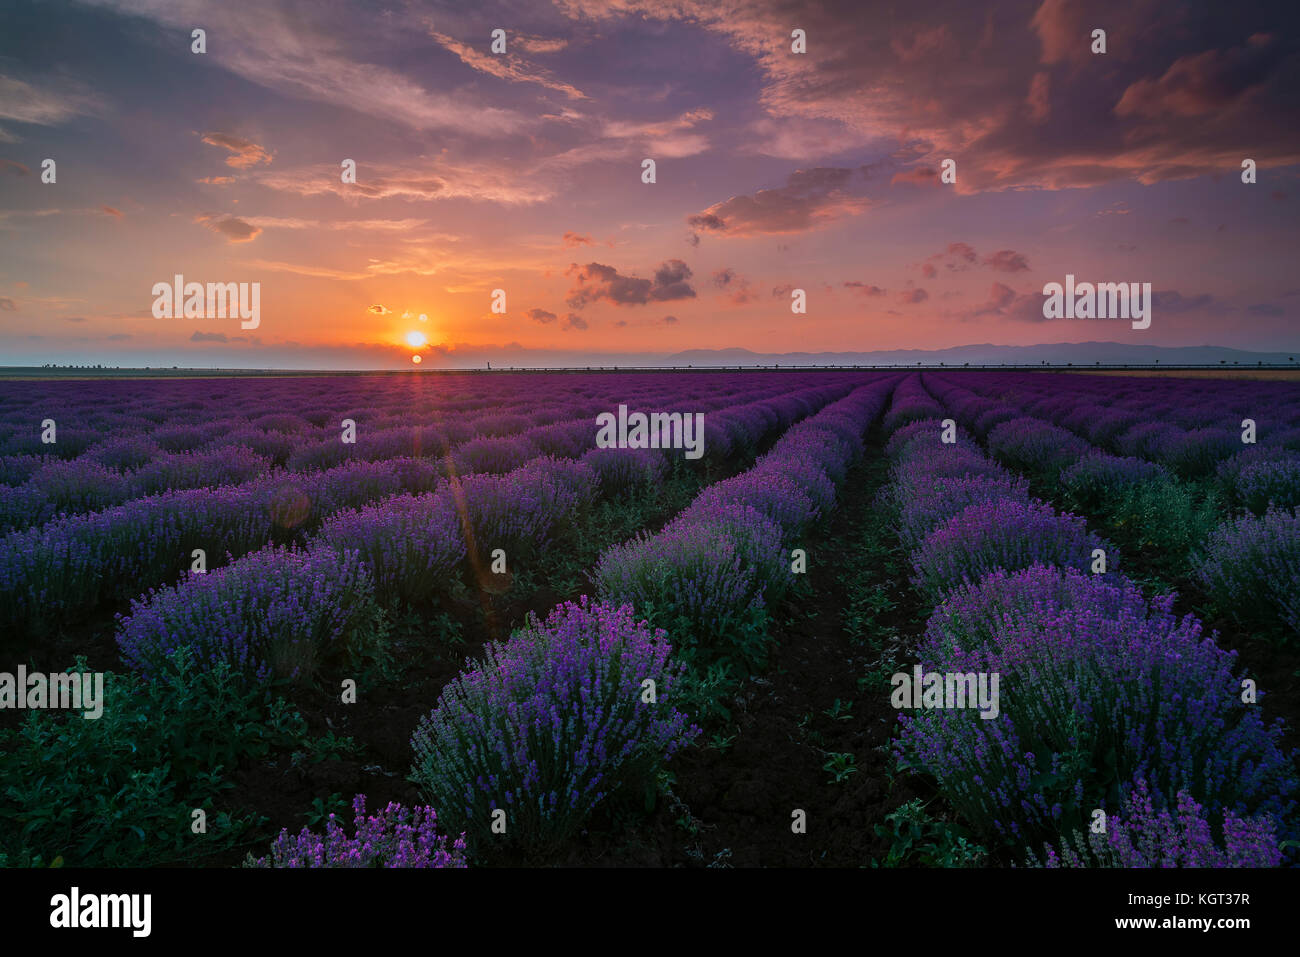 Lavender fileld at sunset Stock Photo